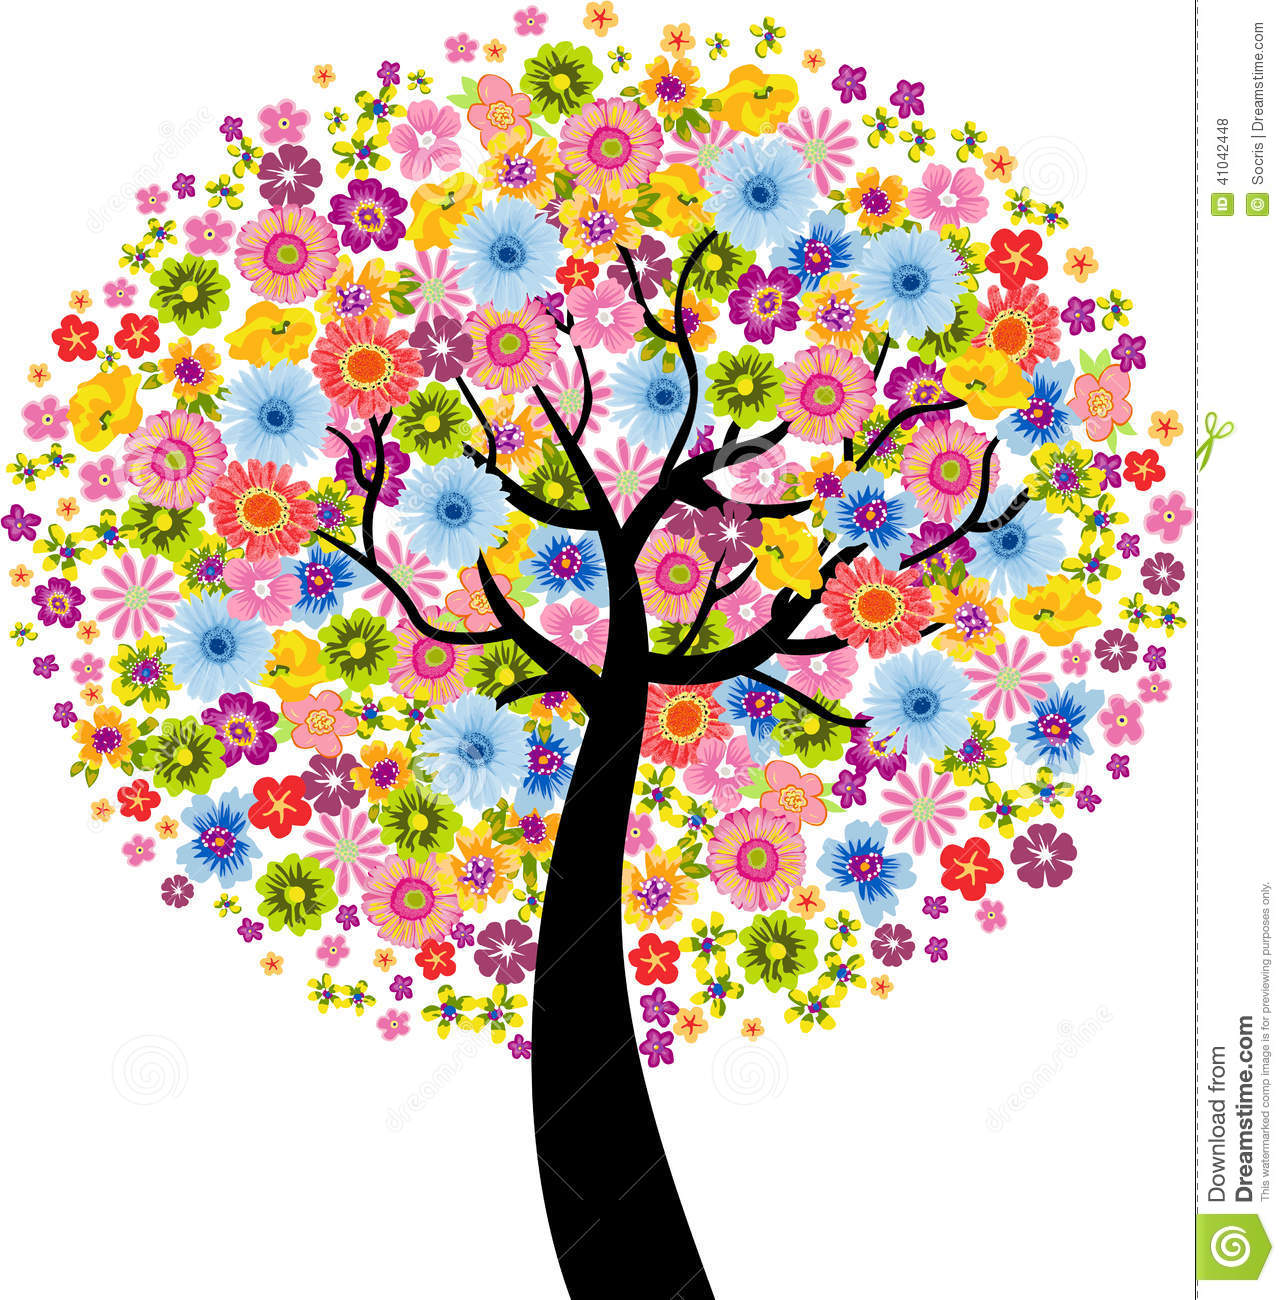 Trees with Colorful Flowers